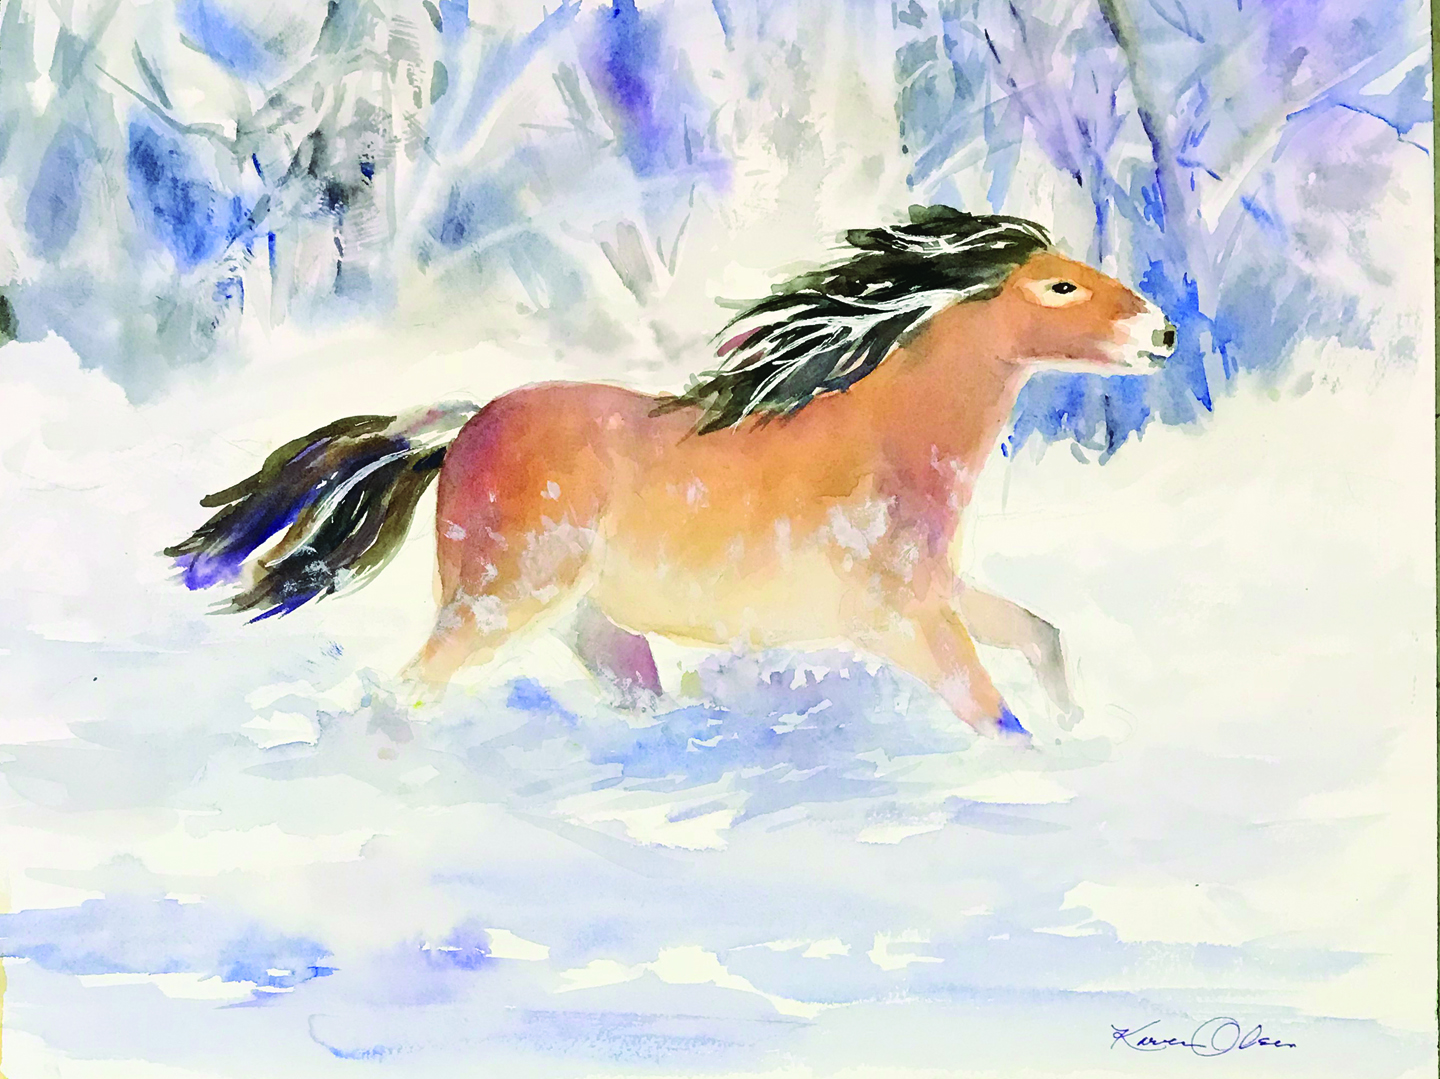 NORDIC FJORD HORSE RUNNING IN SNOW